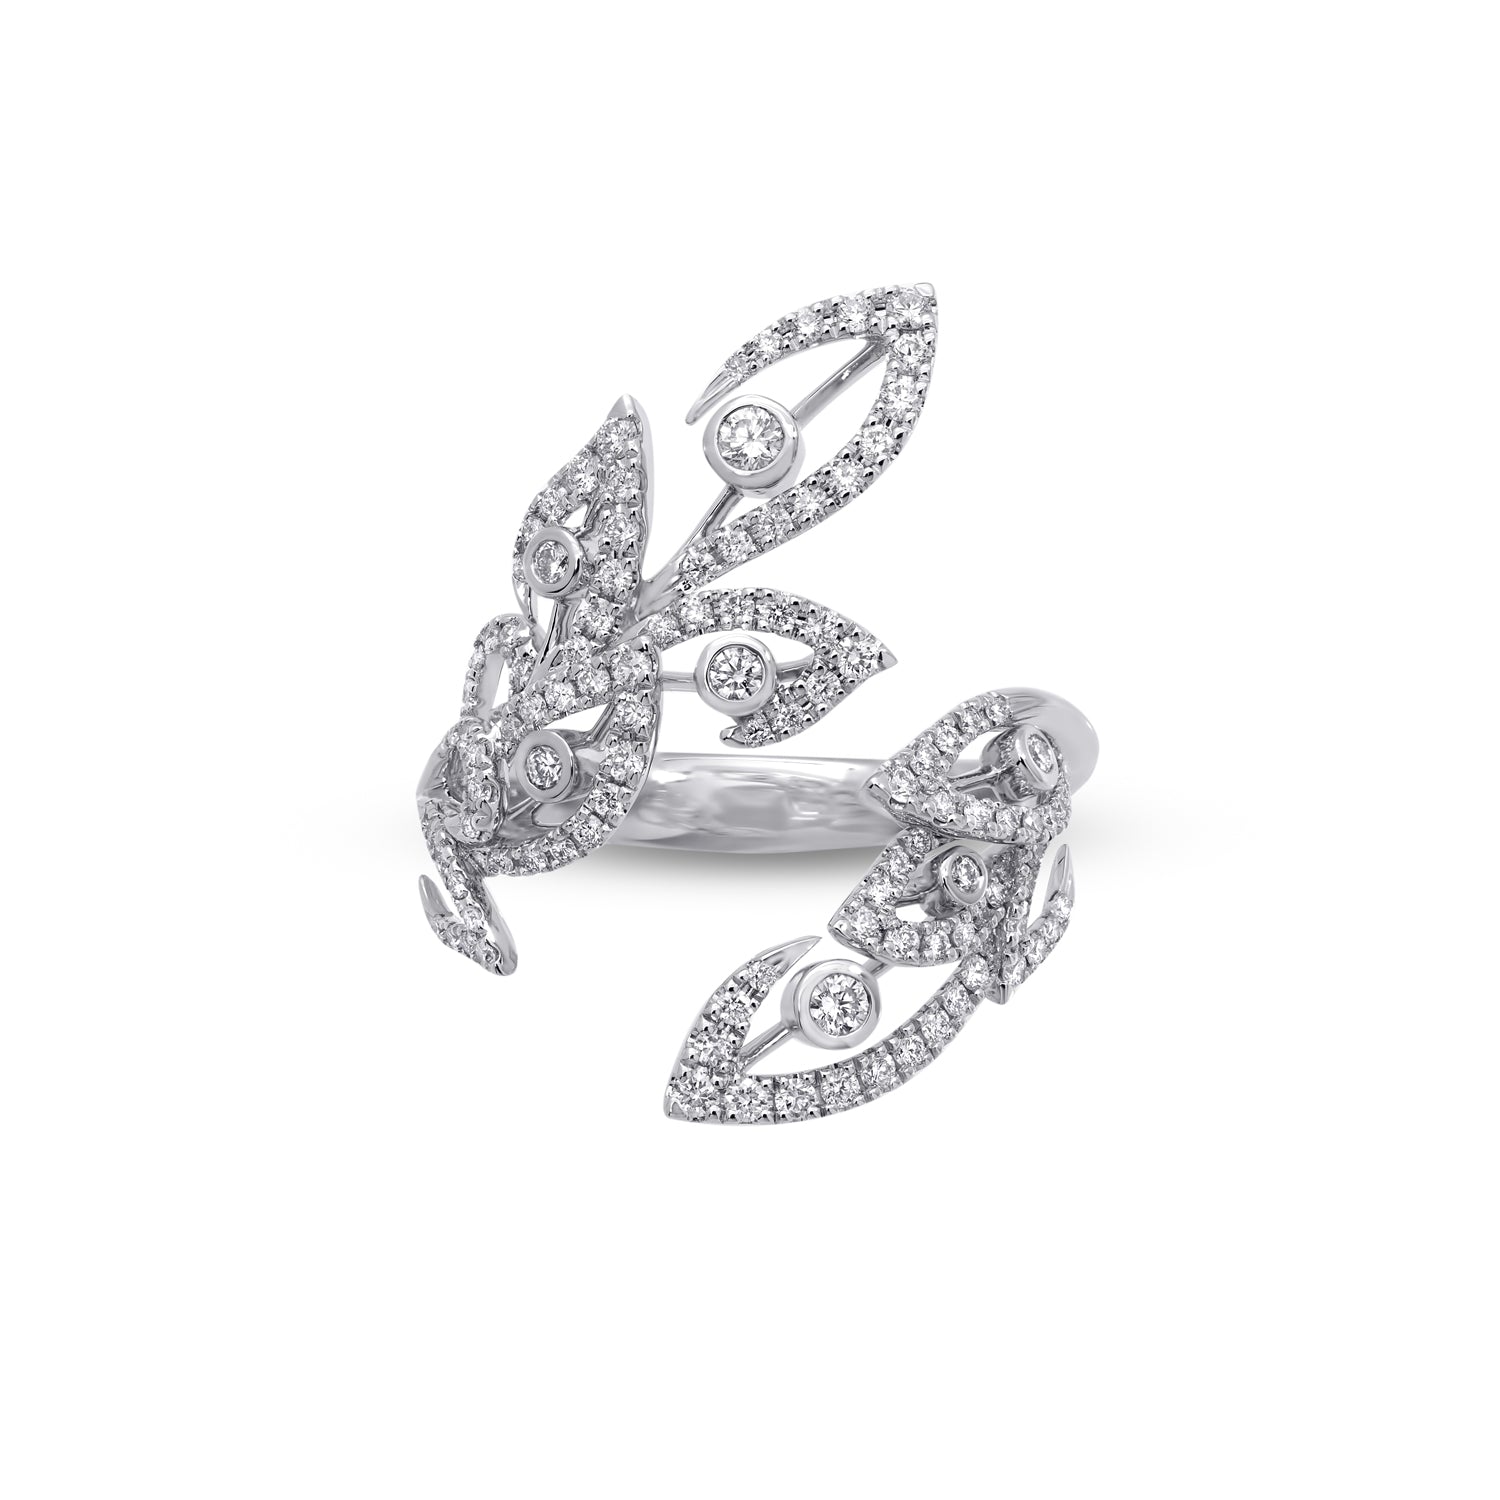 Diamond ring with open leaf design made of 18k white gold, Stenzhorn Jewellery